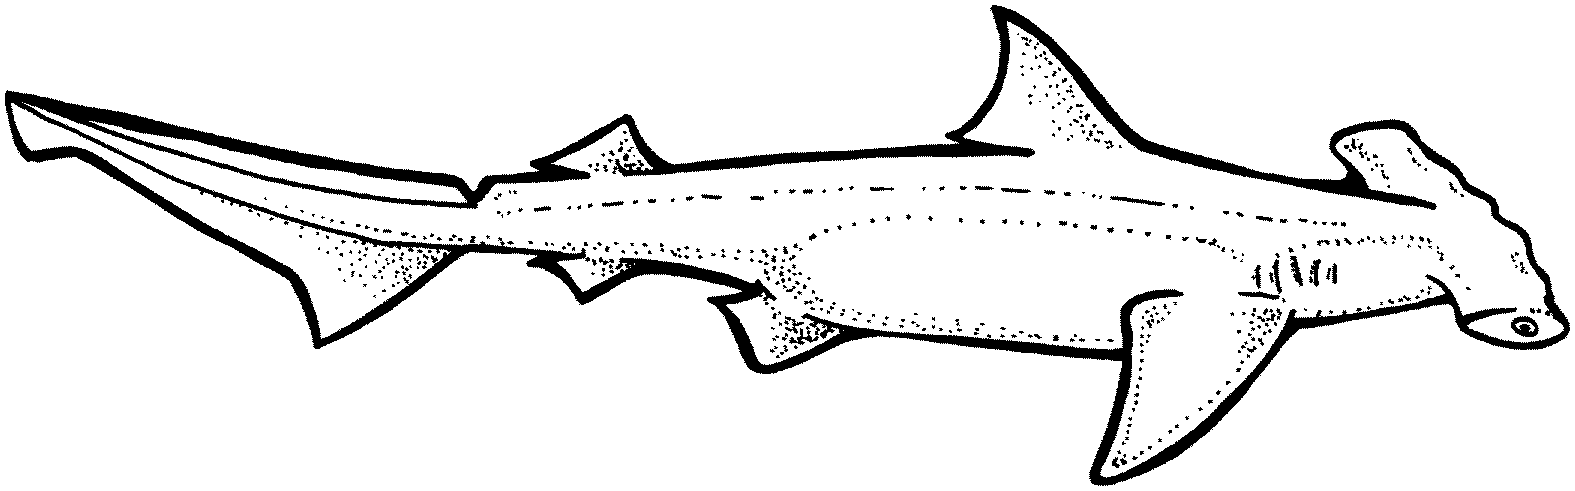 hammerhead shark coloring page free shark coloring pages - Coolage.net